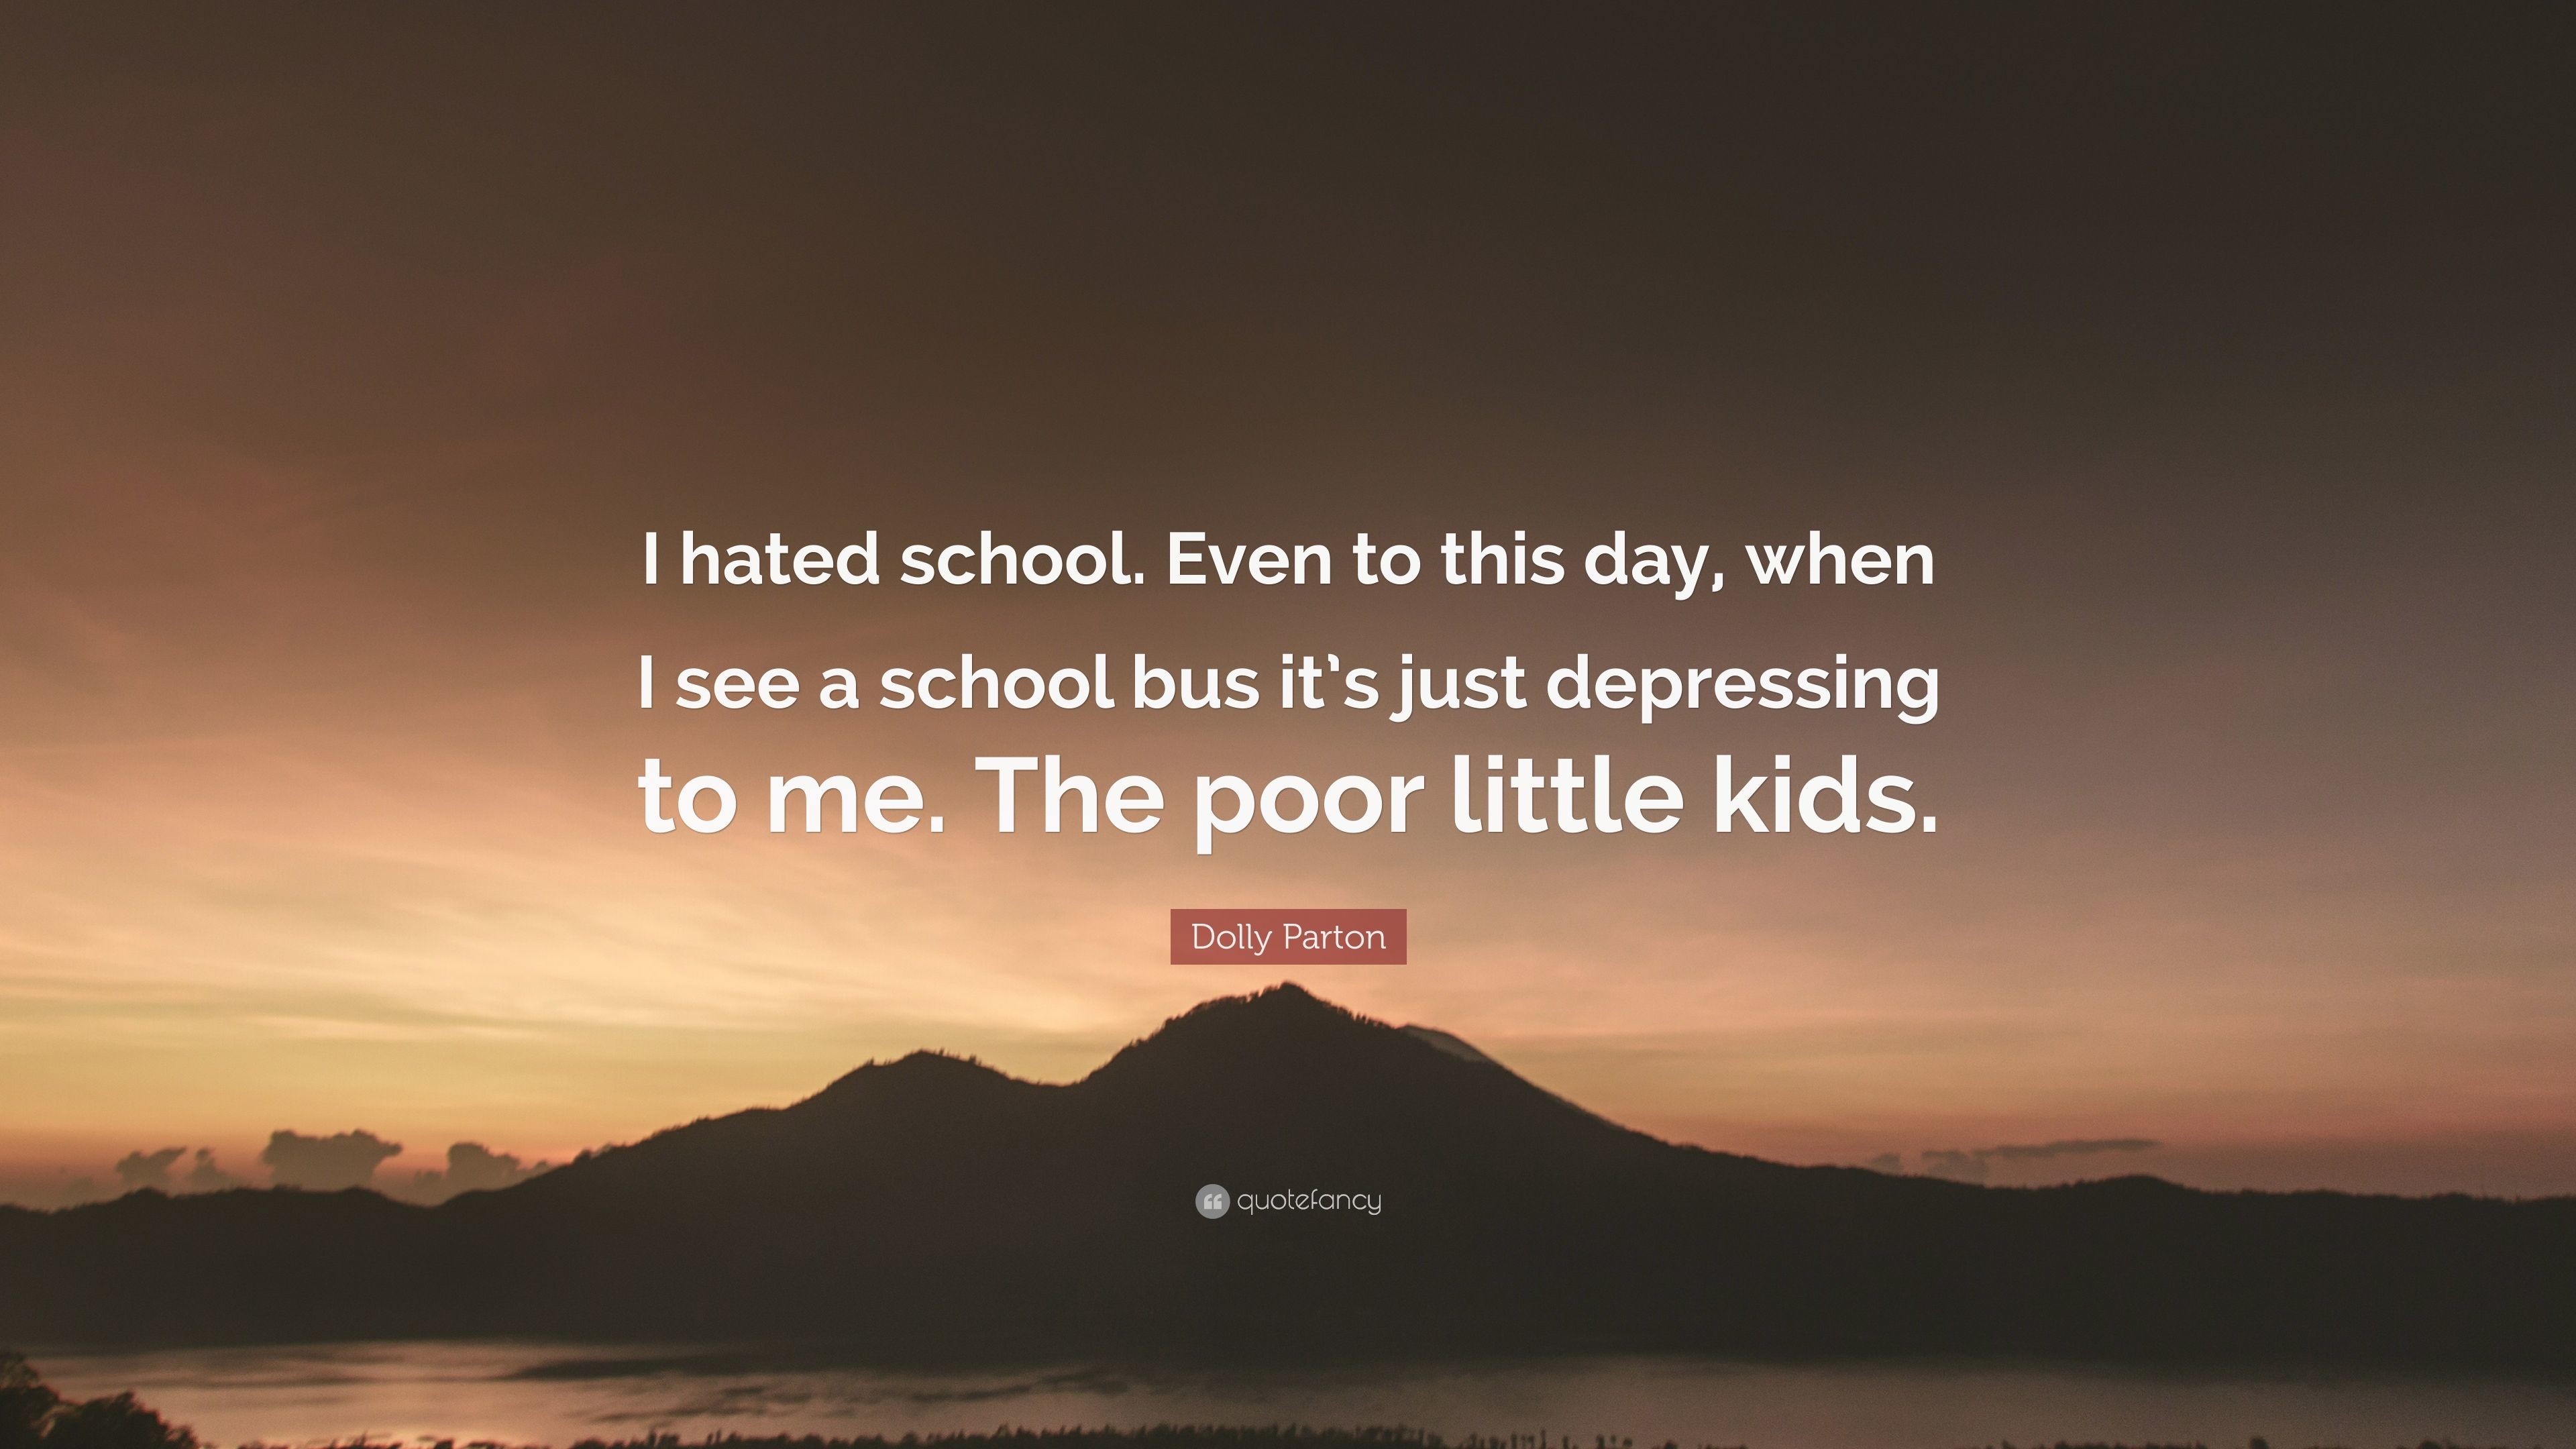 3840x2160 Dolly Parton Quote: “I hated school. Even to this day, when I